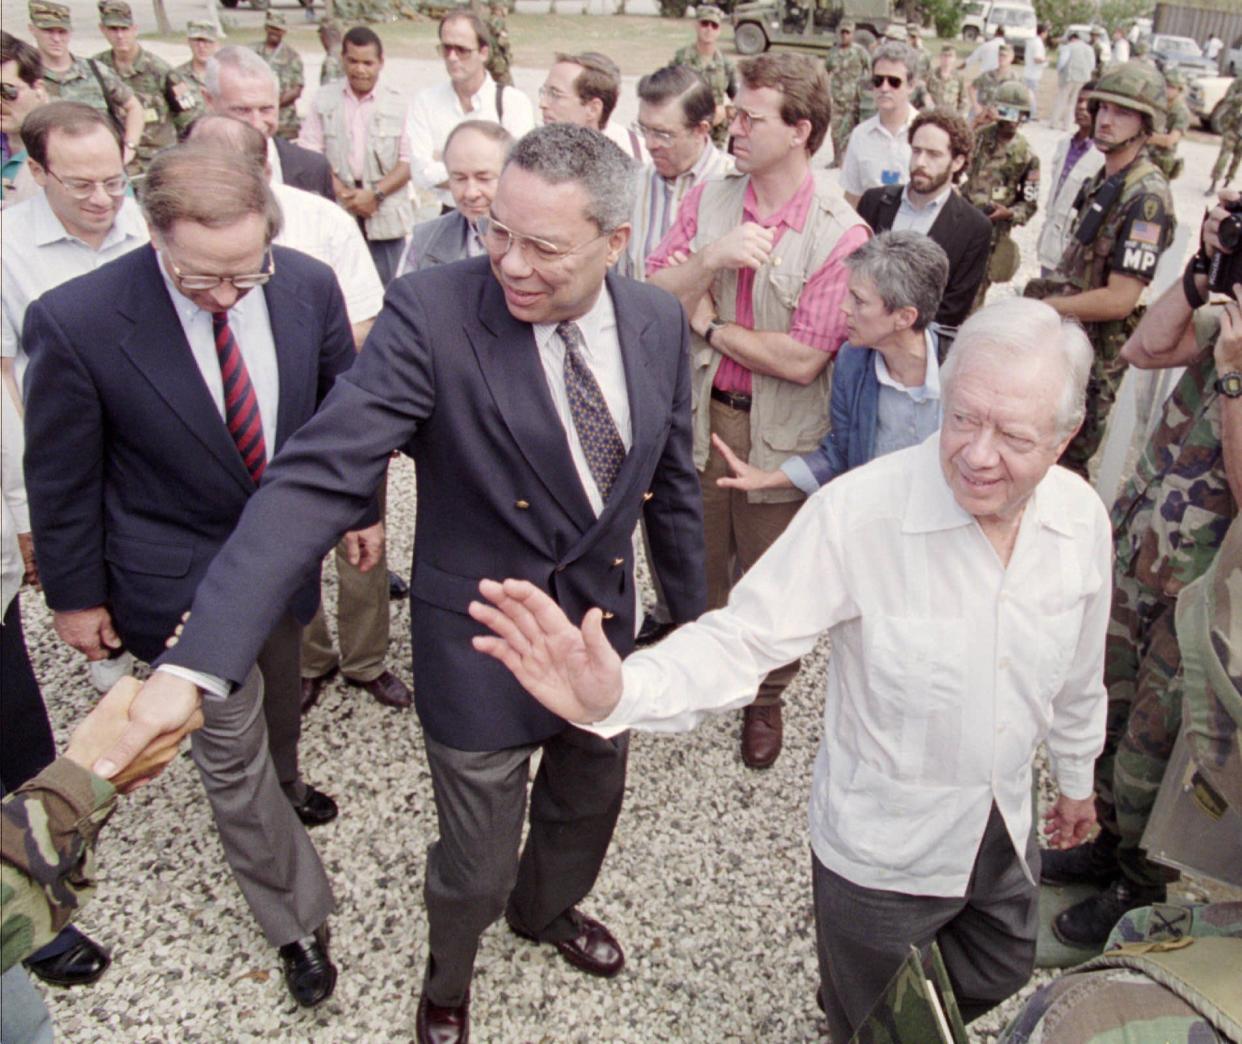 From left, Sen. Sam Nunn, retired Gen. Colin Powell and former President Jimmy Carter, and wave to the media on Feb. 24, 1995, in Port-au-Prince, Haiti, before attending a military briefing on the current situation in Haiti. Later today the trio will travel to several areas of the countryside.